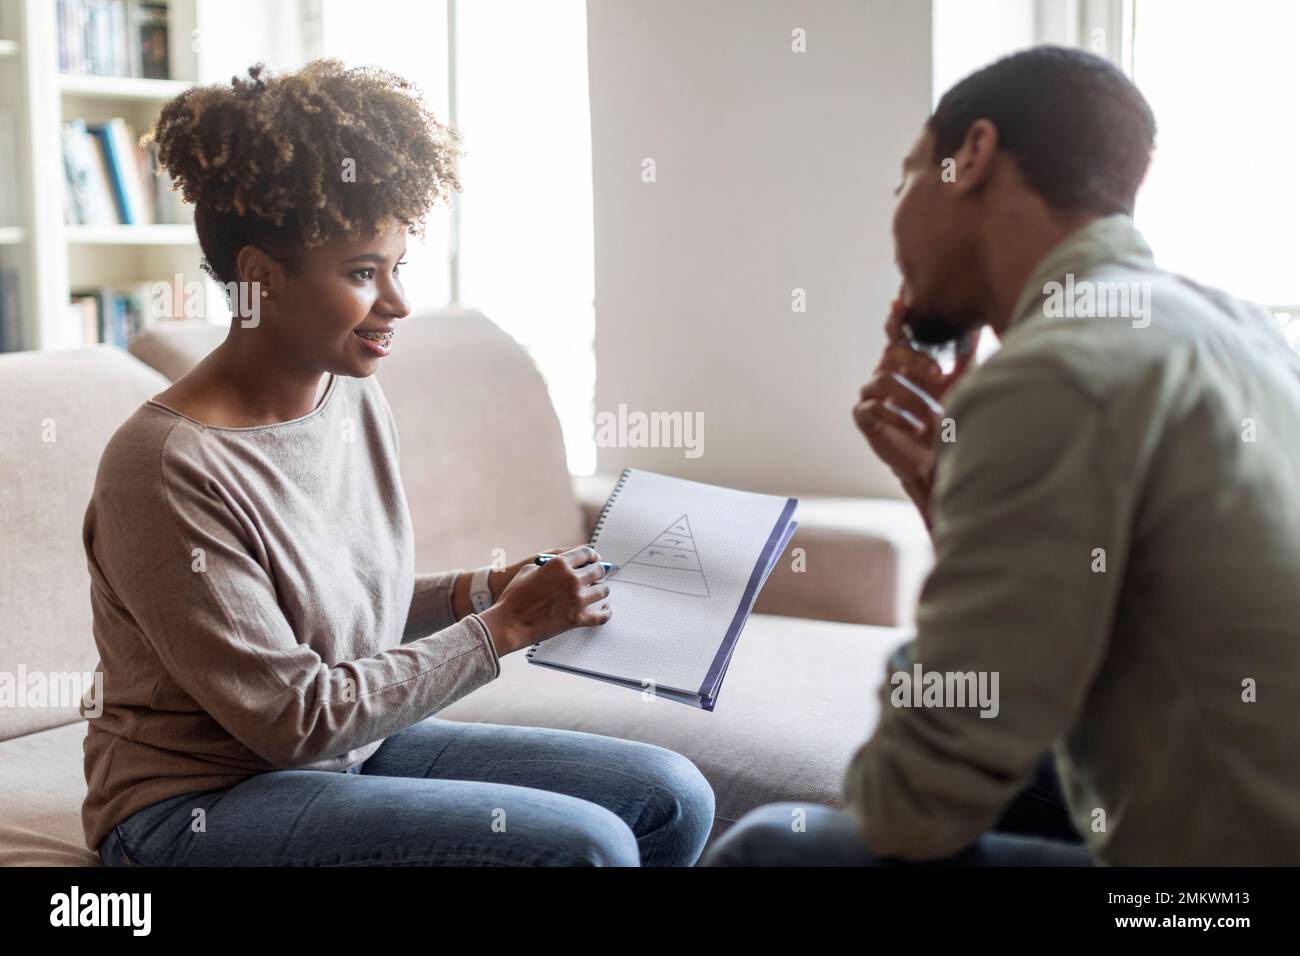 Young black woman psychologist having conversation with patient, showing notes Stock Photo